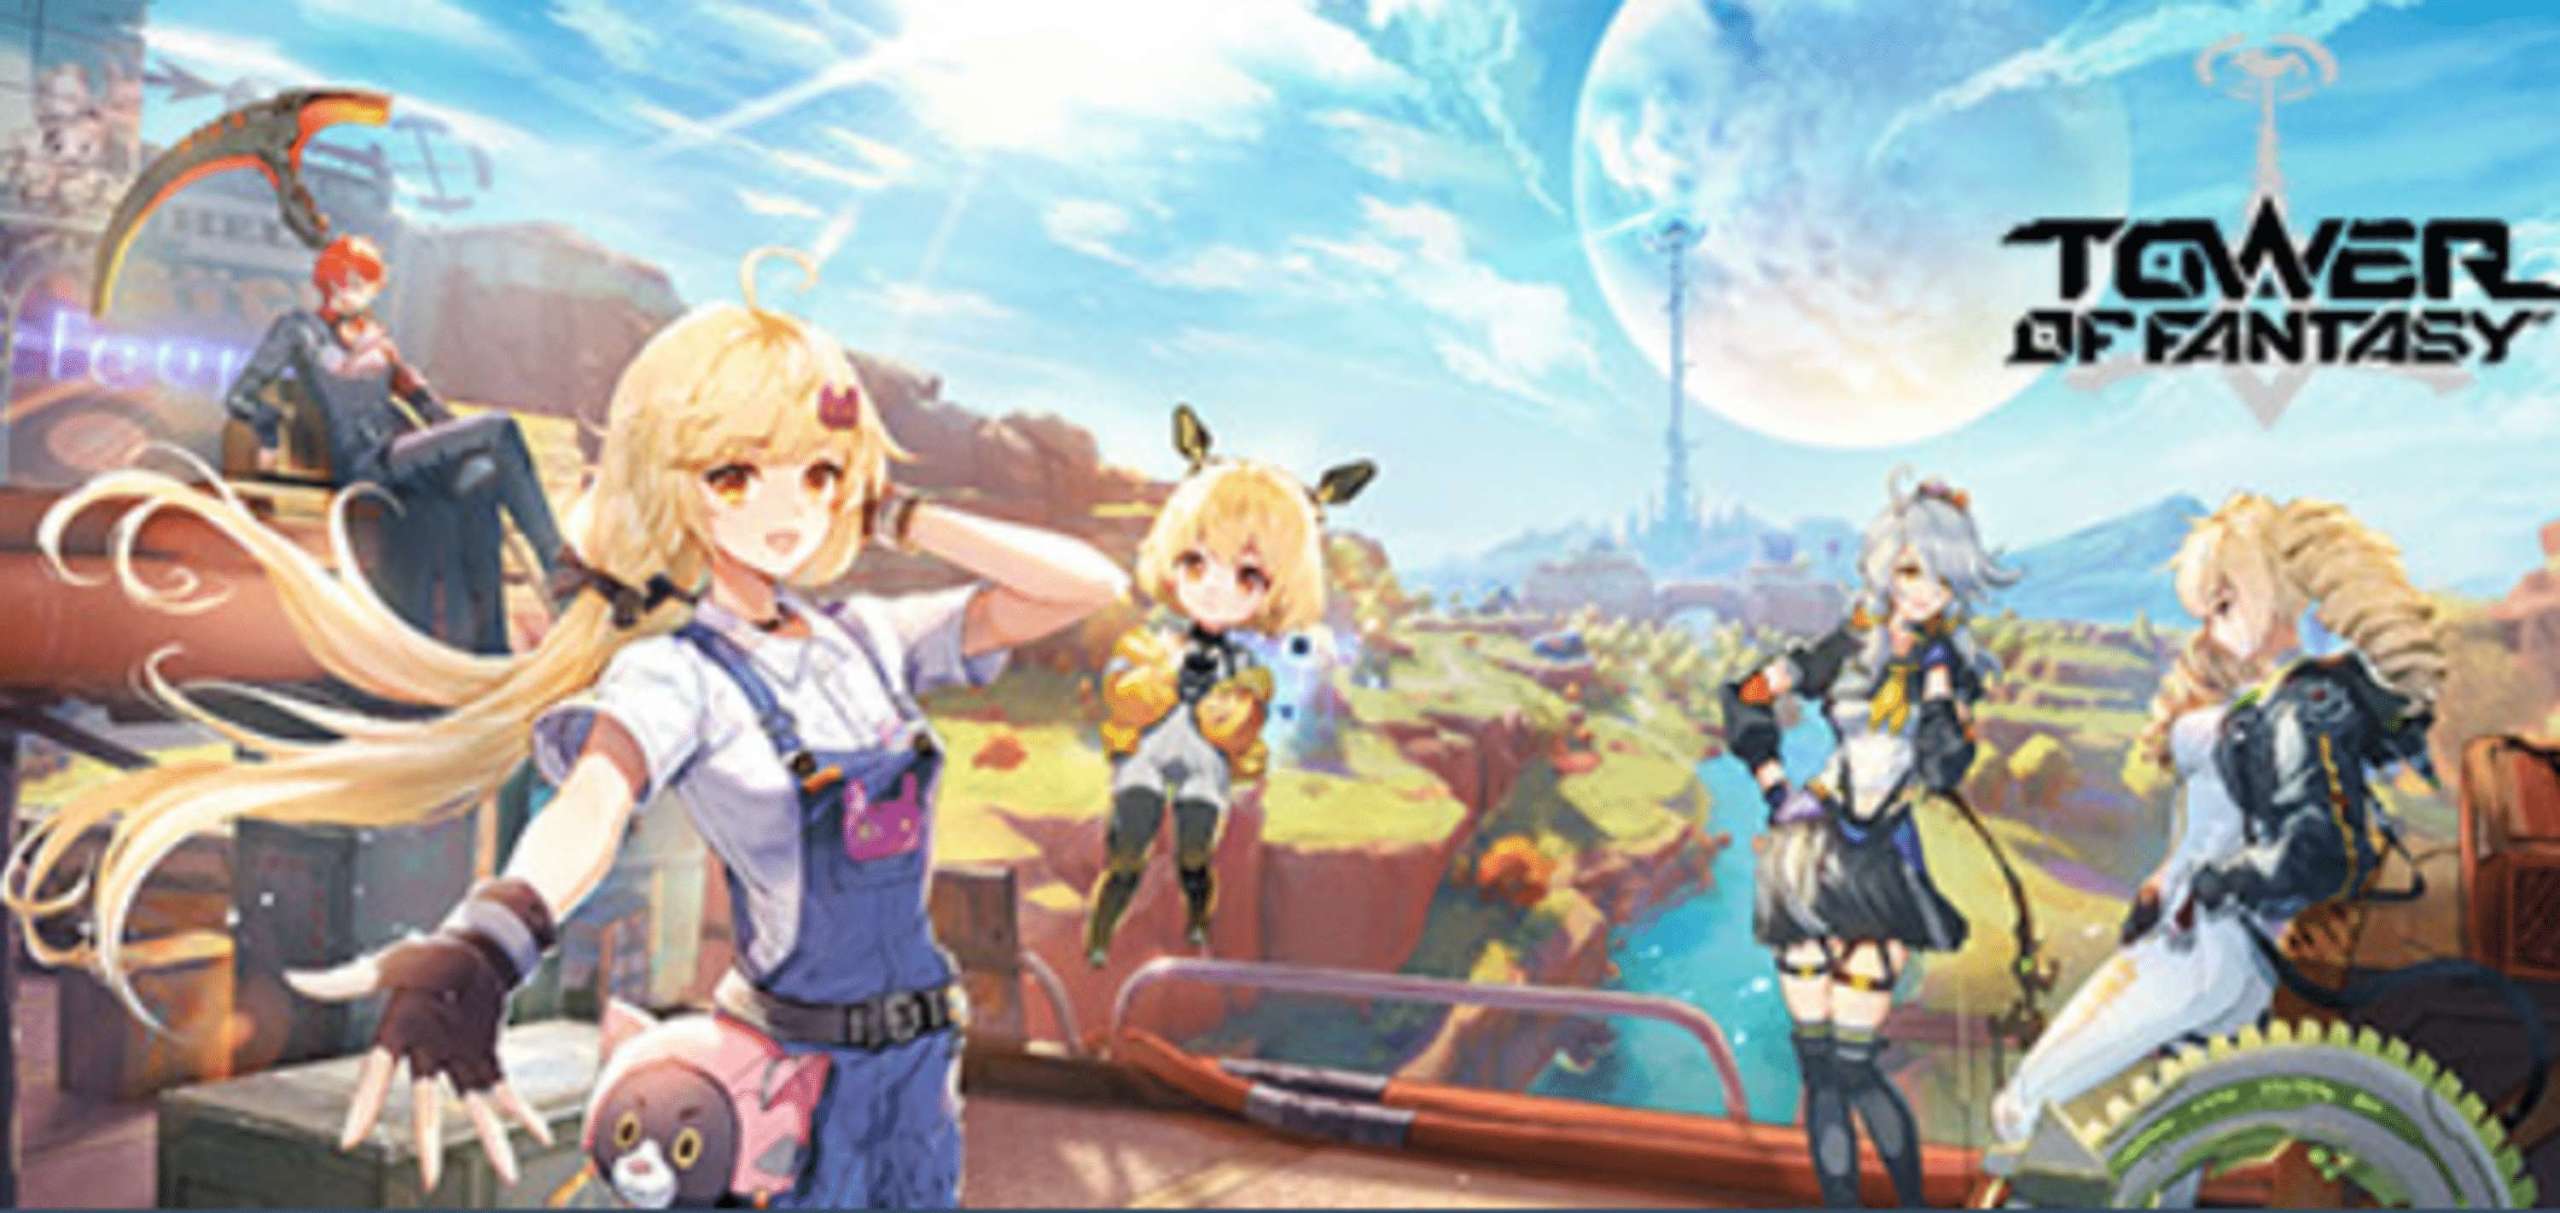 Anime Multiplayer Online Role-Playing Game Tower Of Fantasy Features Extensive Customizability